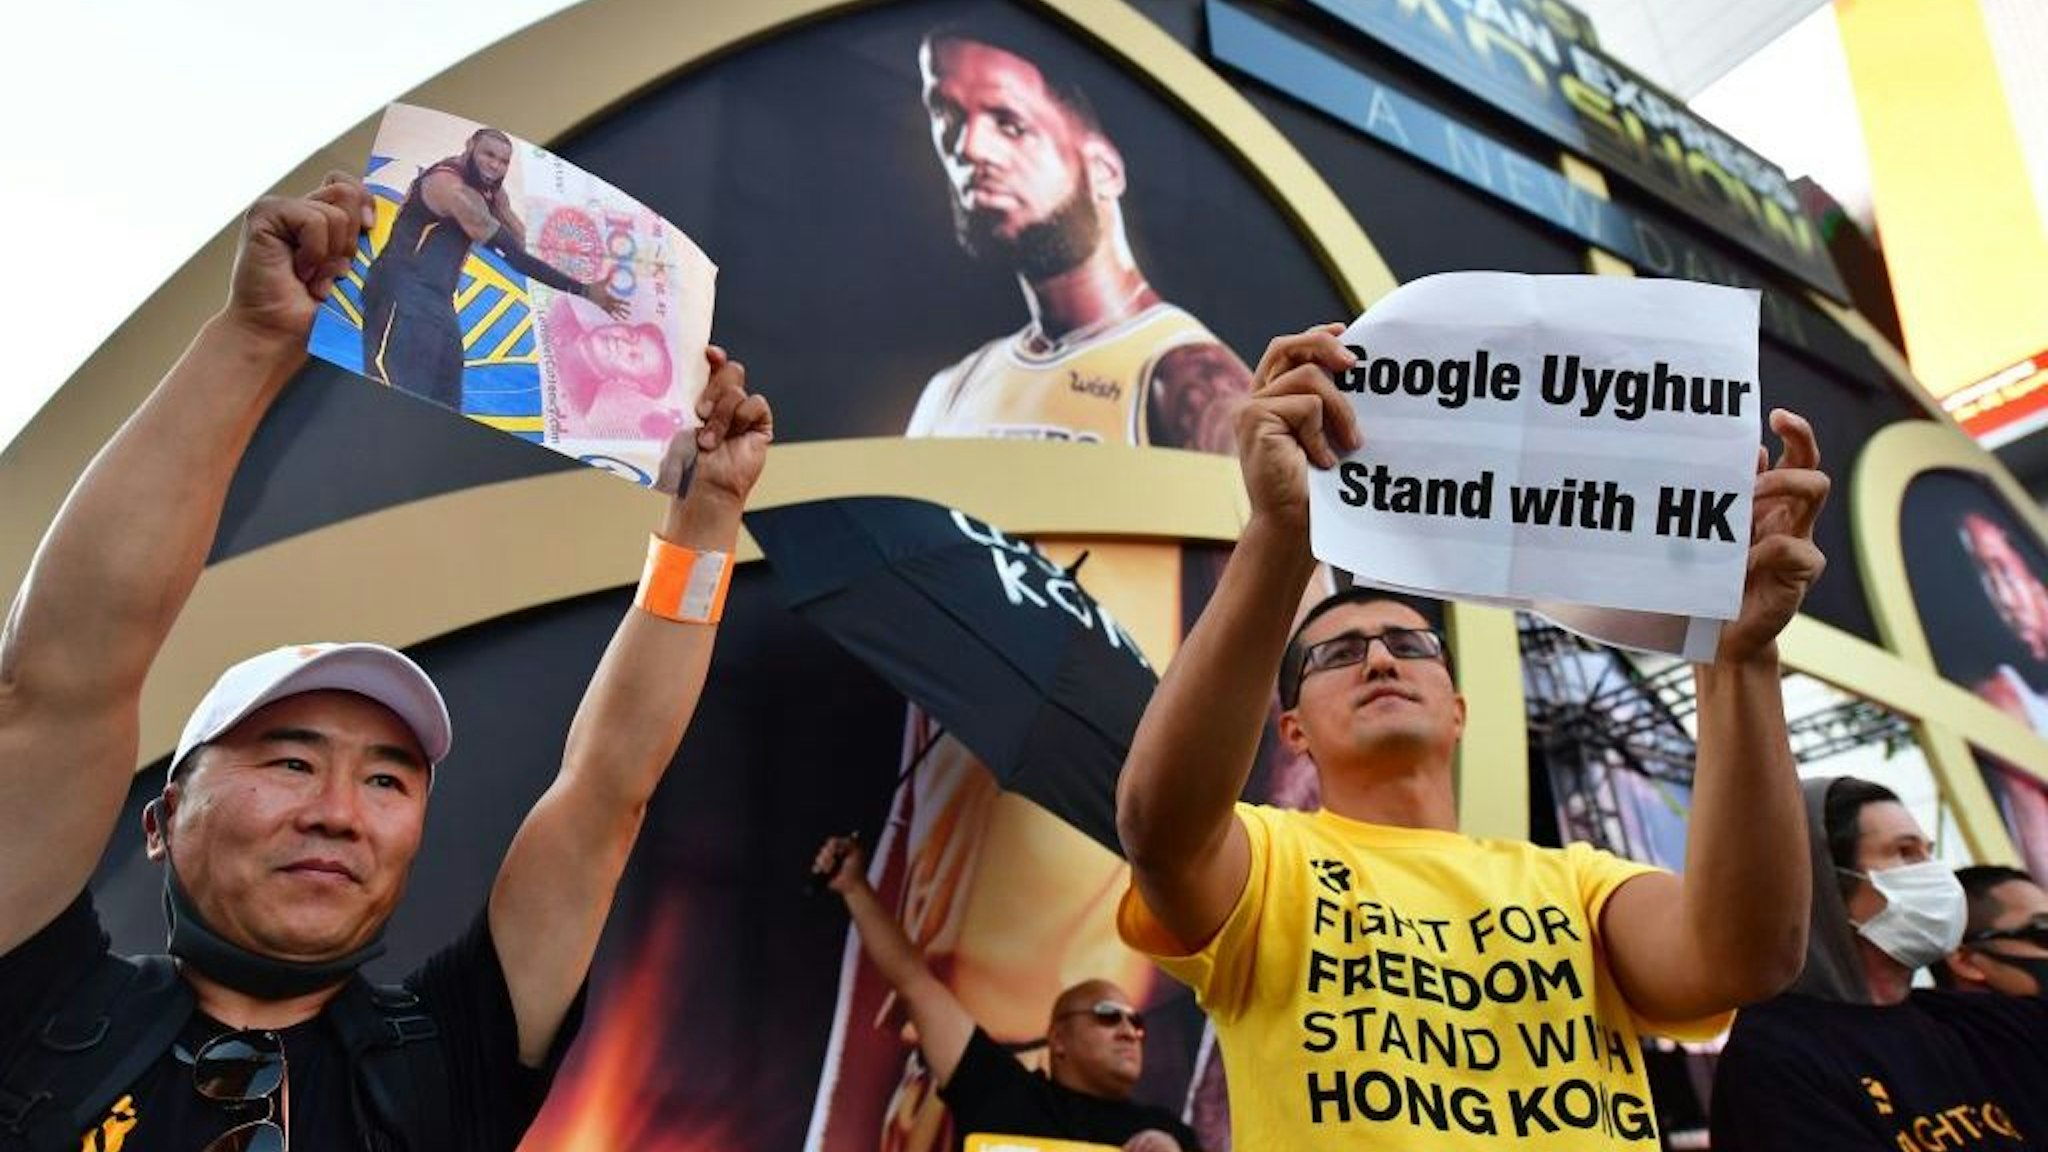 Anti-Chinese Communist Party activists protest outside Staples Center ahead of the Lakers vs Clippers NBA season opener in Los Angeles on October 22, 2019. - Activists handed out free T-shirts displaying support for the Hong Kong protests after an NBA fan in Northern California raised enough money to pay for more than 10,000 shirts, according to the organizer who goes by the pseudonym "Sun Lared" as LeBron James of the Lakers suffers the brunt of people's anger after comments he made in response to the tweet from Houston Rockets GM Daryl Morey in support of Hong Kong protesters, and drawing the ire of the Chinese Communist Party. (Photo by Frederic J. BROWN / AFP)